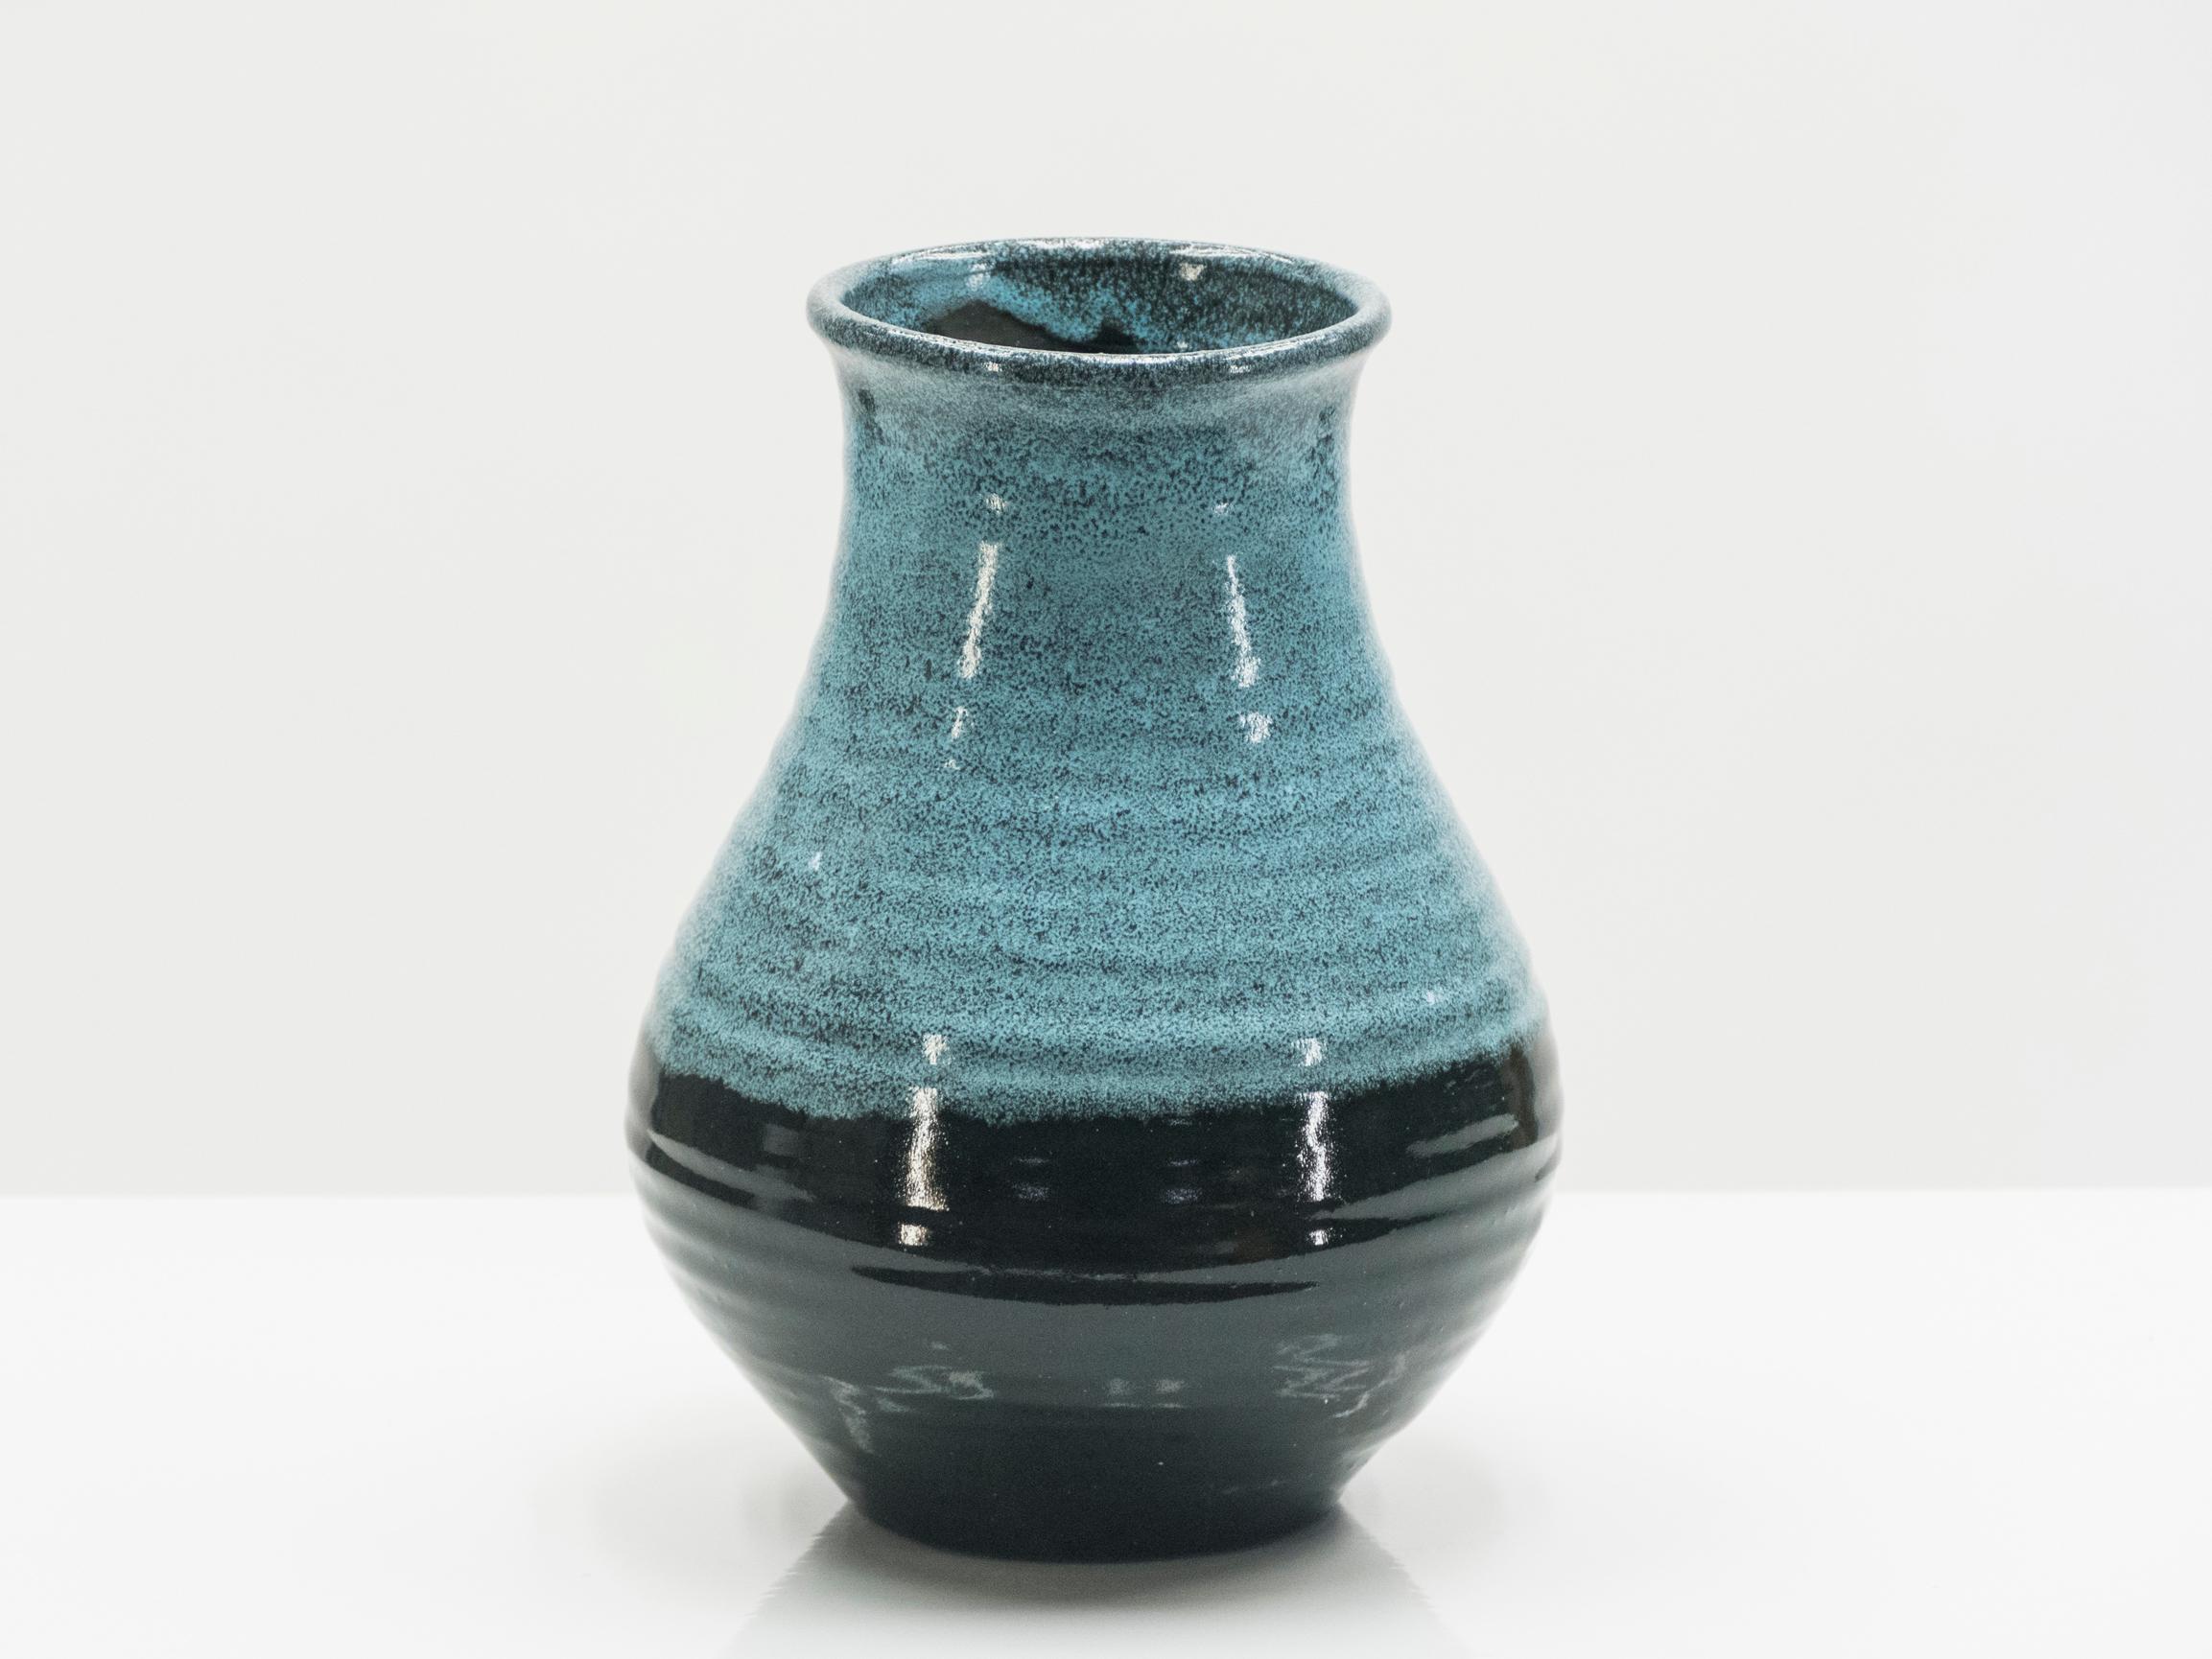 This curved French Accolay Pottery vase would be beautiful in any space. It was created in the early 1960s by a French ceramicist from Accolay, with an ample body and energetic trumpet neck. A chic and timeless bi-color piece. Hint of a mark under